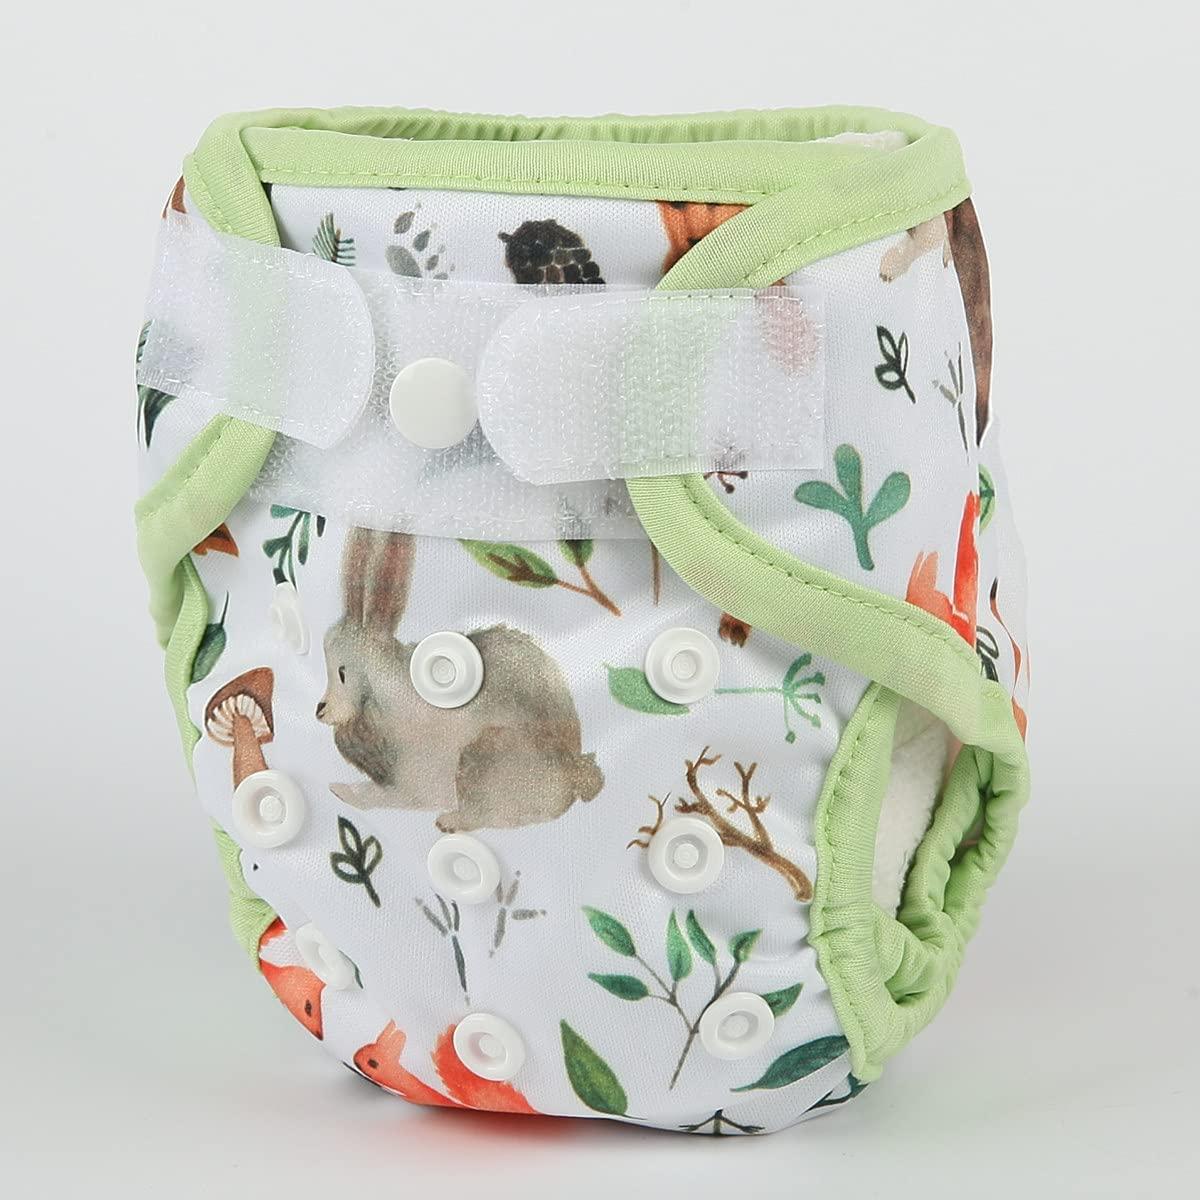 Newborn Baby Cloth Diaper Cover Nappy Hook And Loop